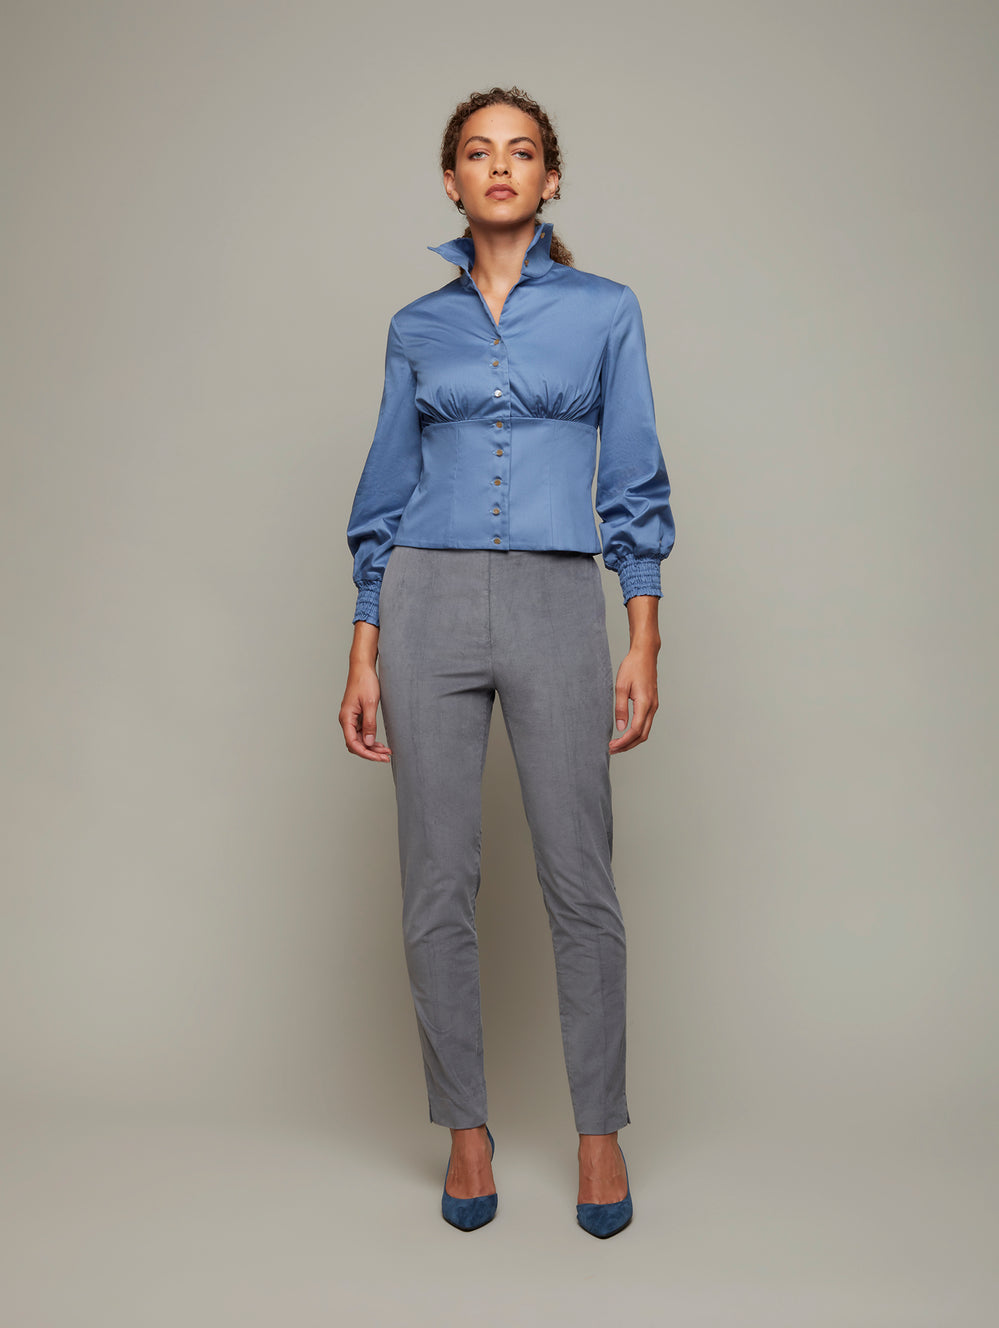 DEPLOY womenswear ruched high collar dusty blue fitted shirt front view